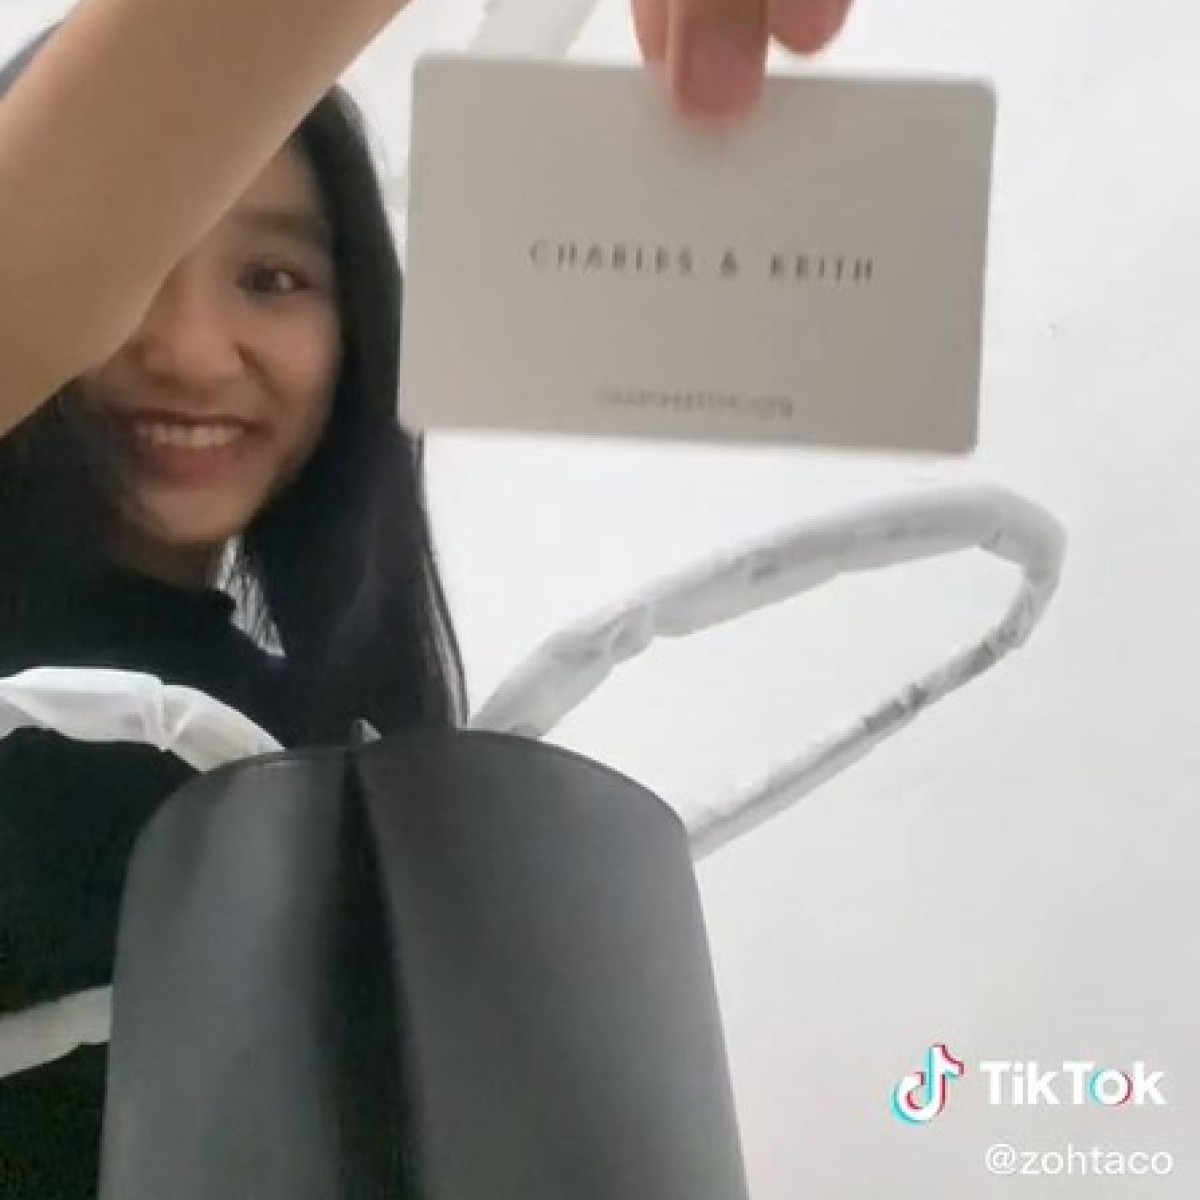 Teen Shows Off Charles & Keith Bag On TikTok, Gets Slammed For Calling It A  'Luxury' Brand